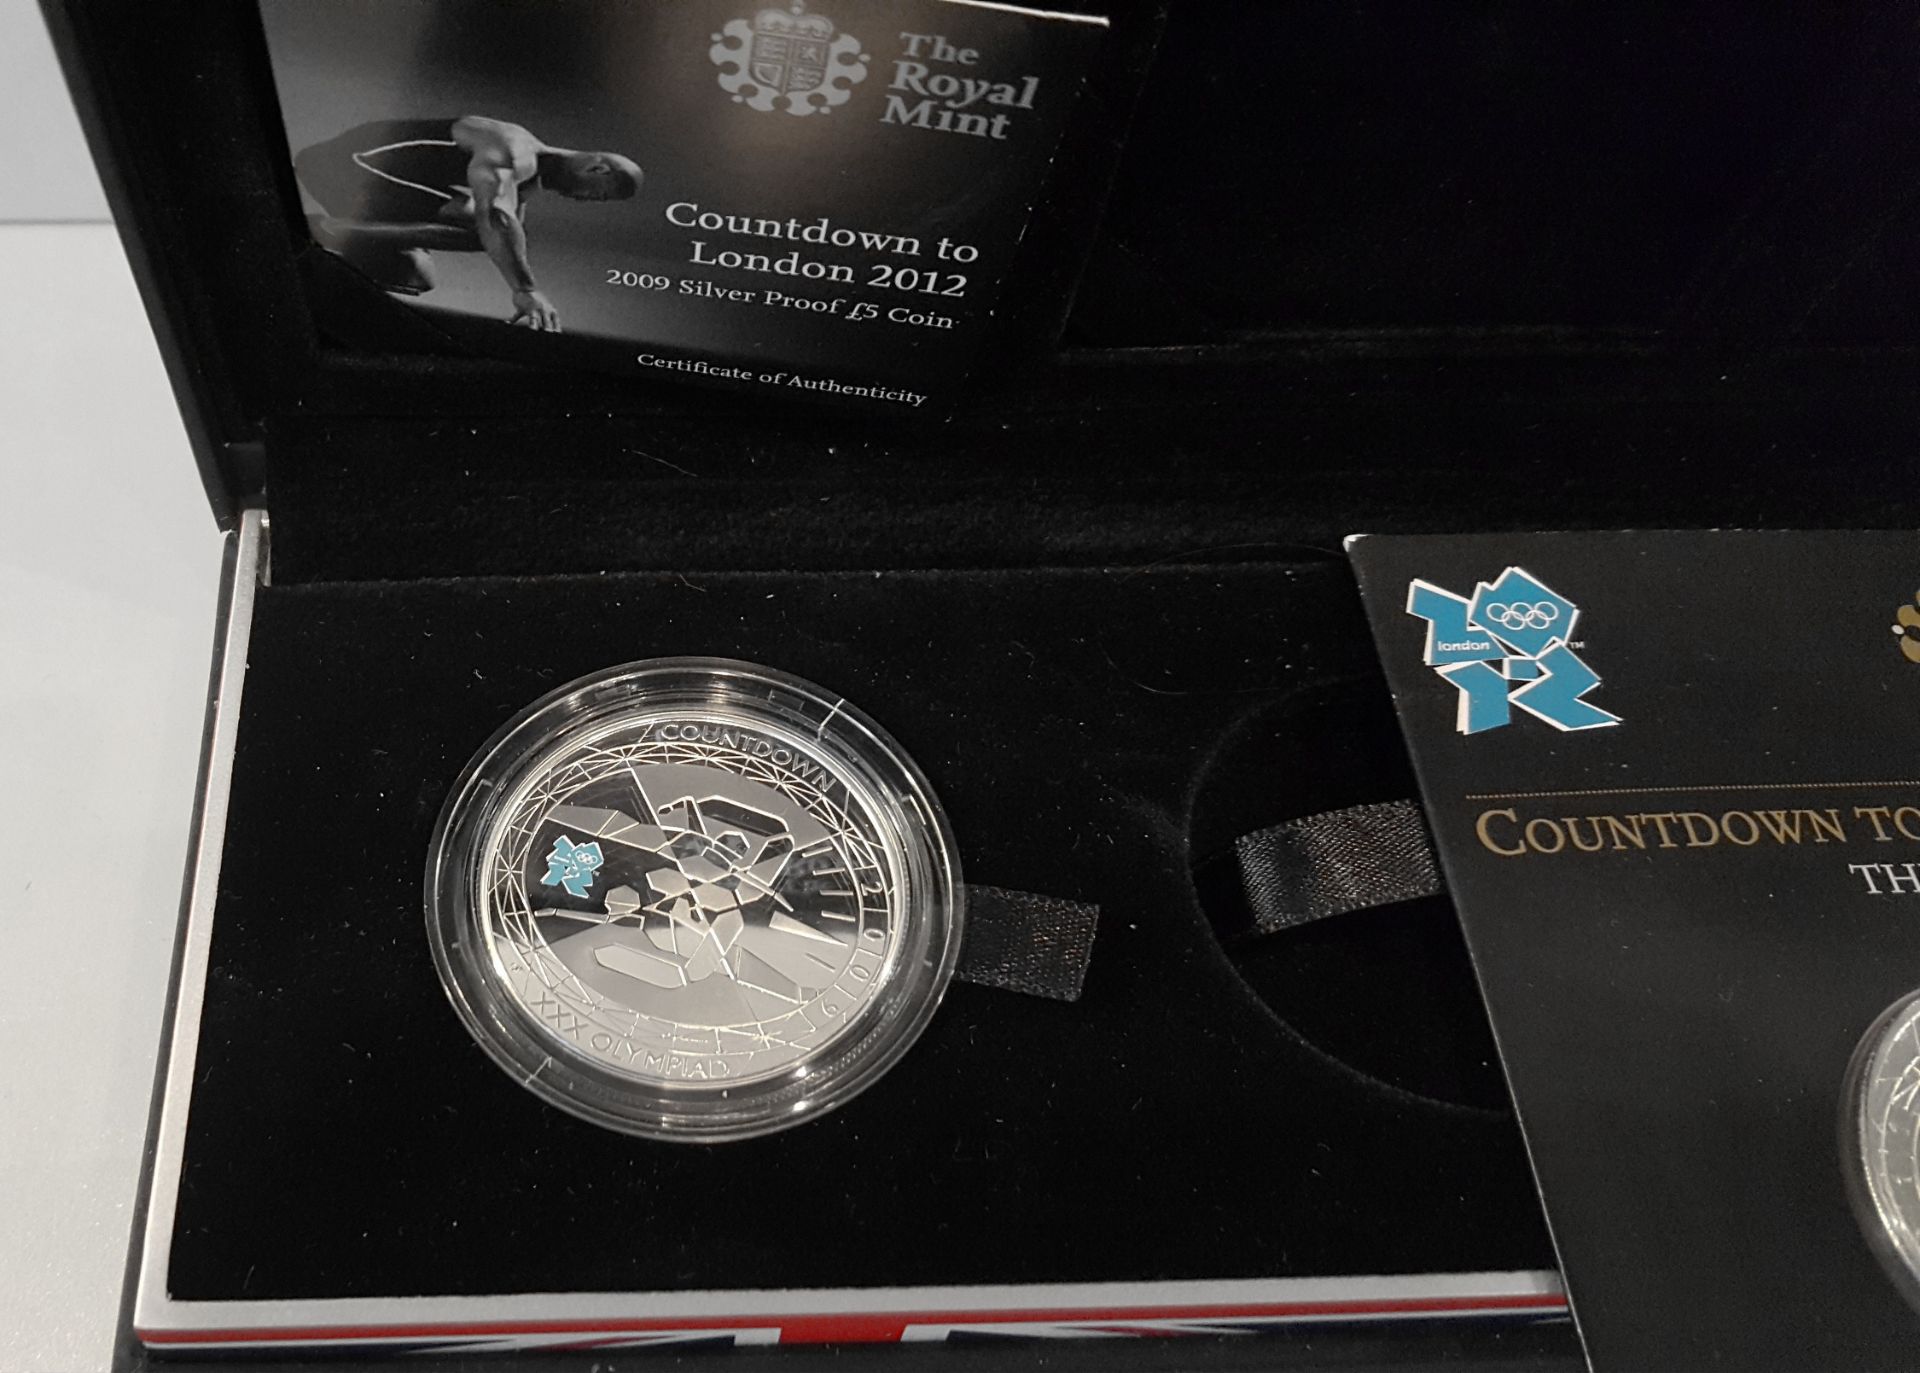 Collectable Coins UK 2012 Olympics & Display Box - Image 2 of 3